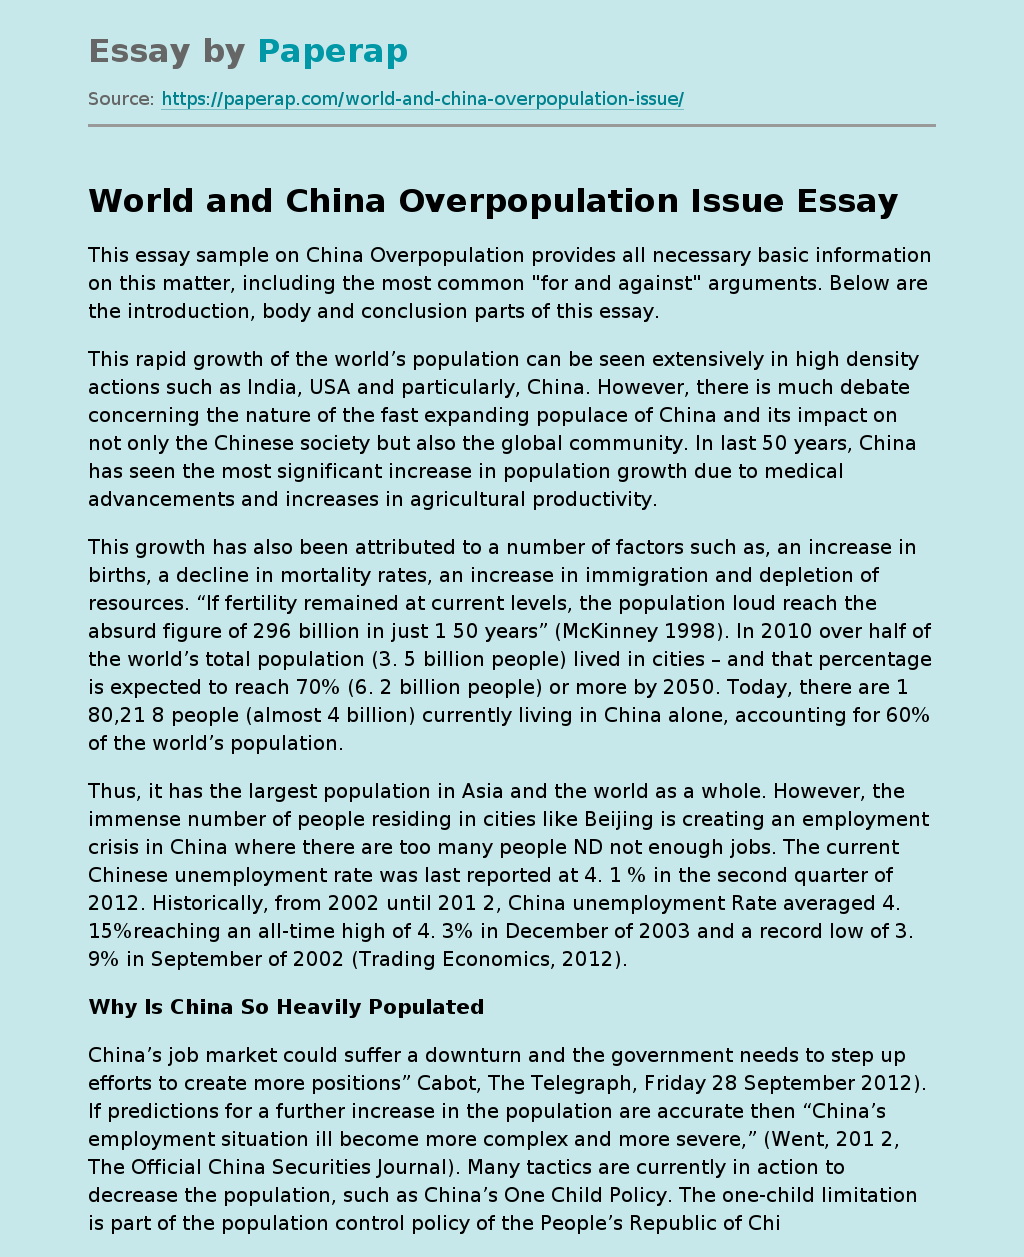 World and China Overpopulation Issue